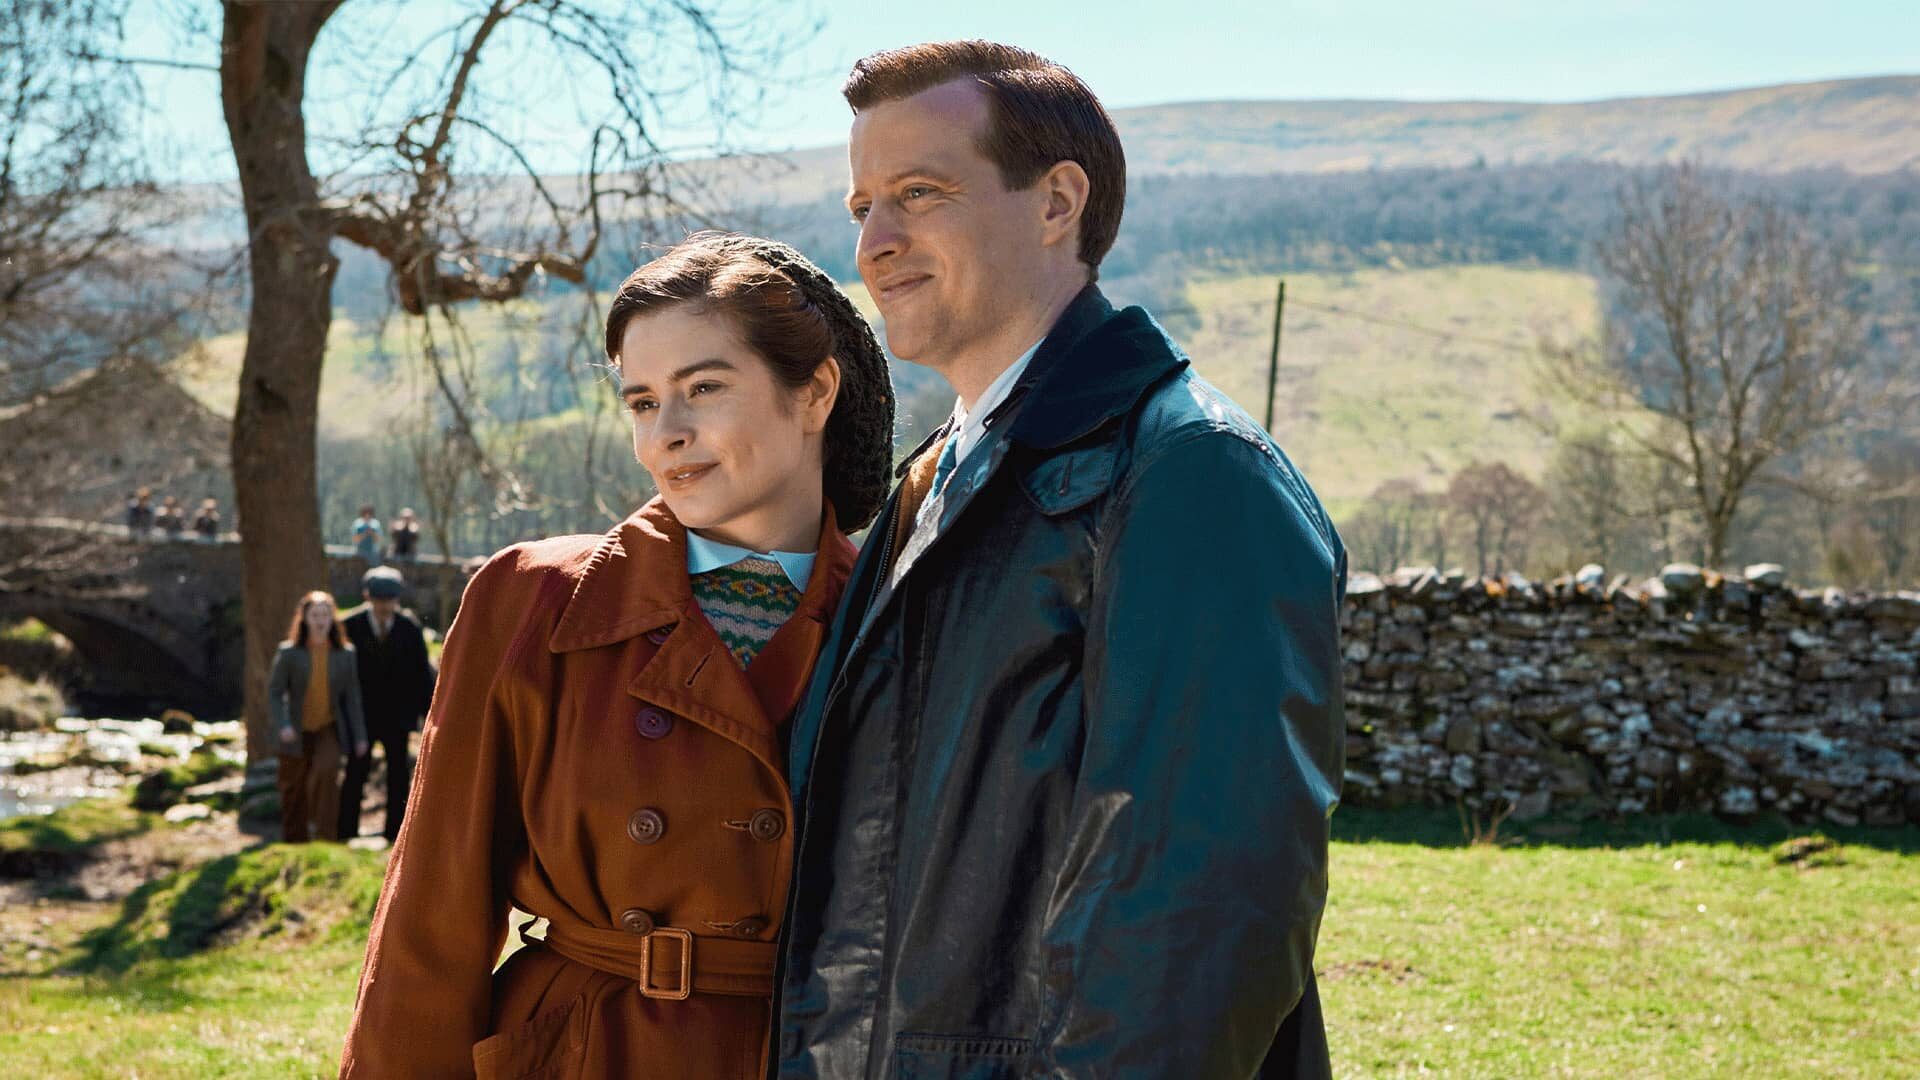 Rachel Shenton as Helen Herriot and Nicholas Ralph as James Herriot in All Creatures Great and Small Season 4